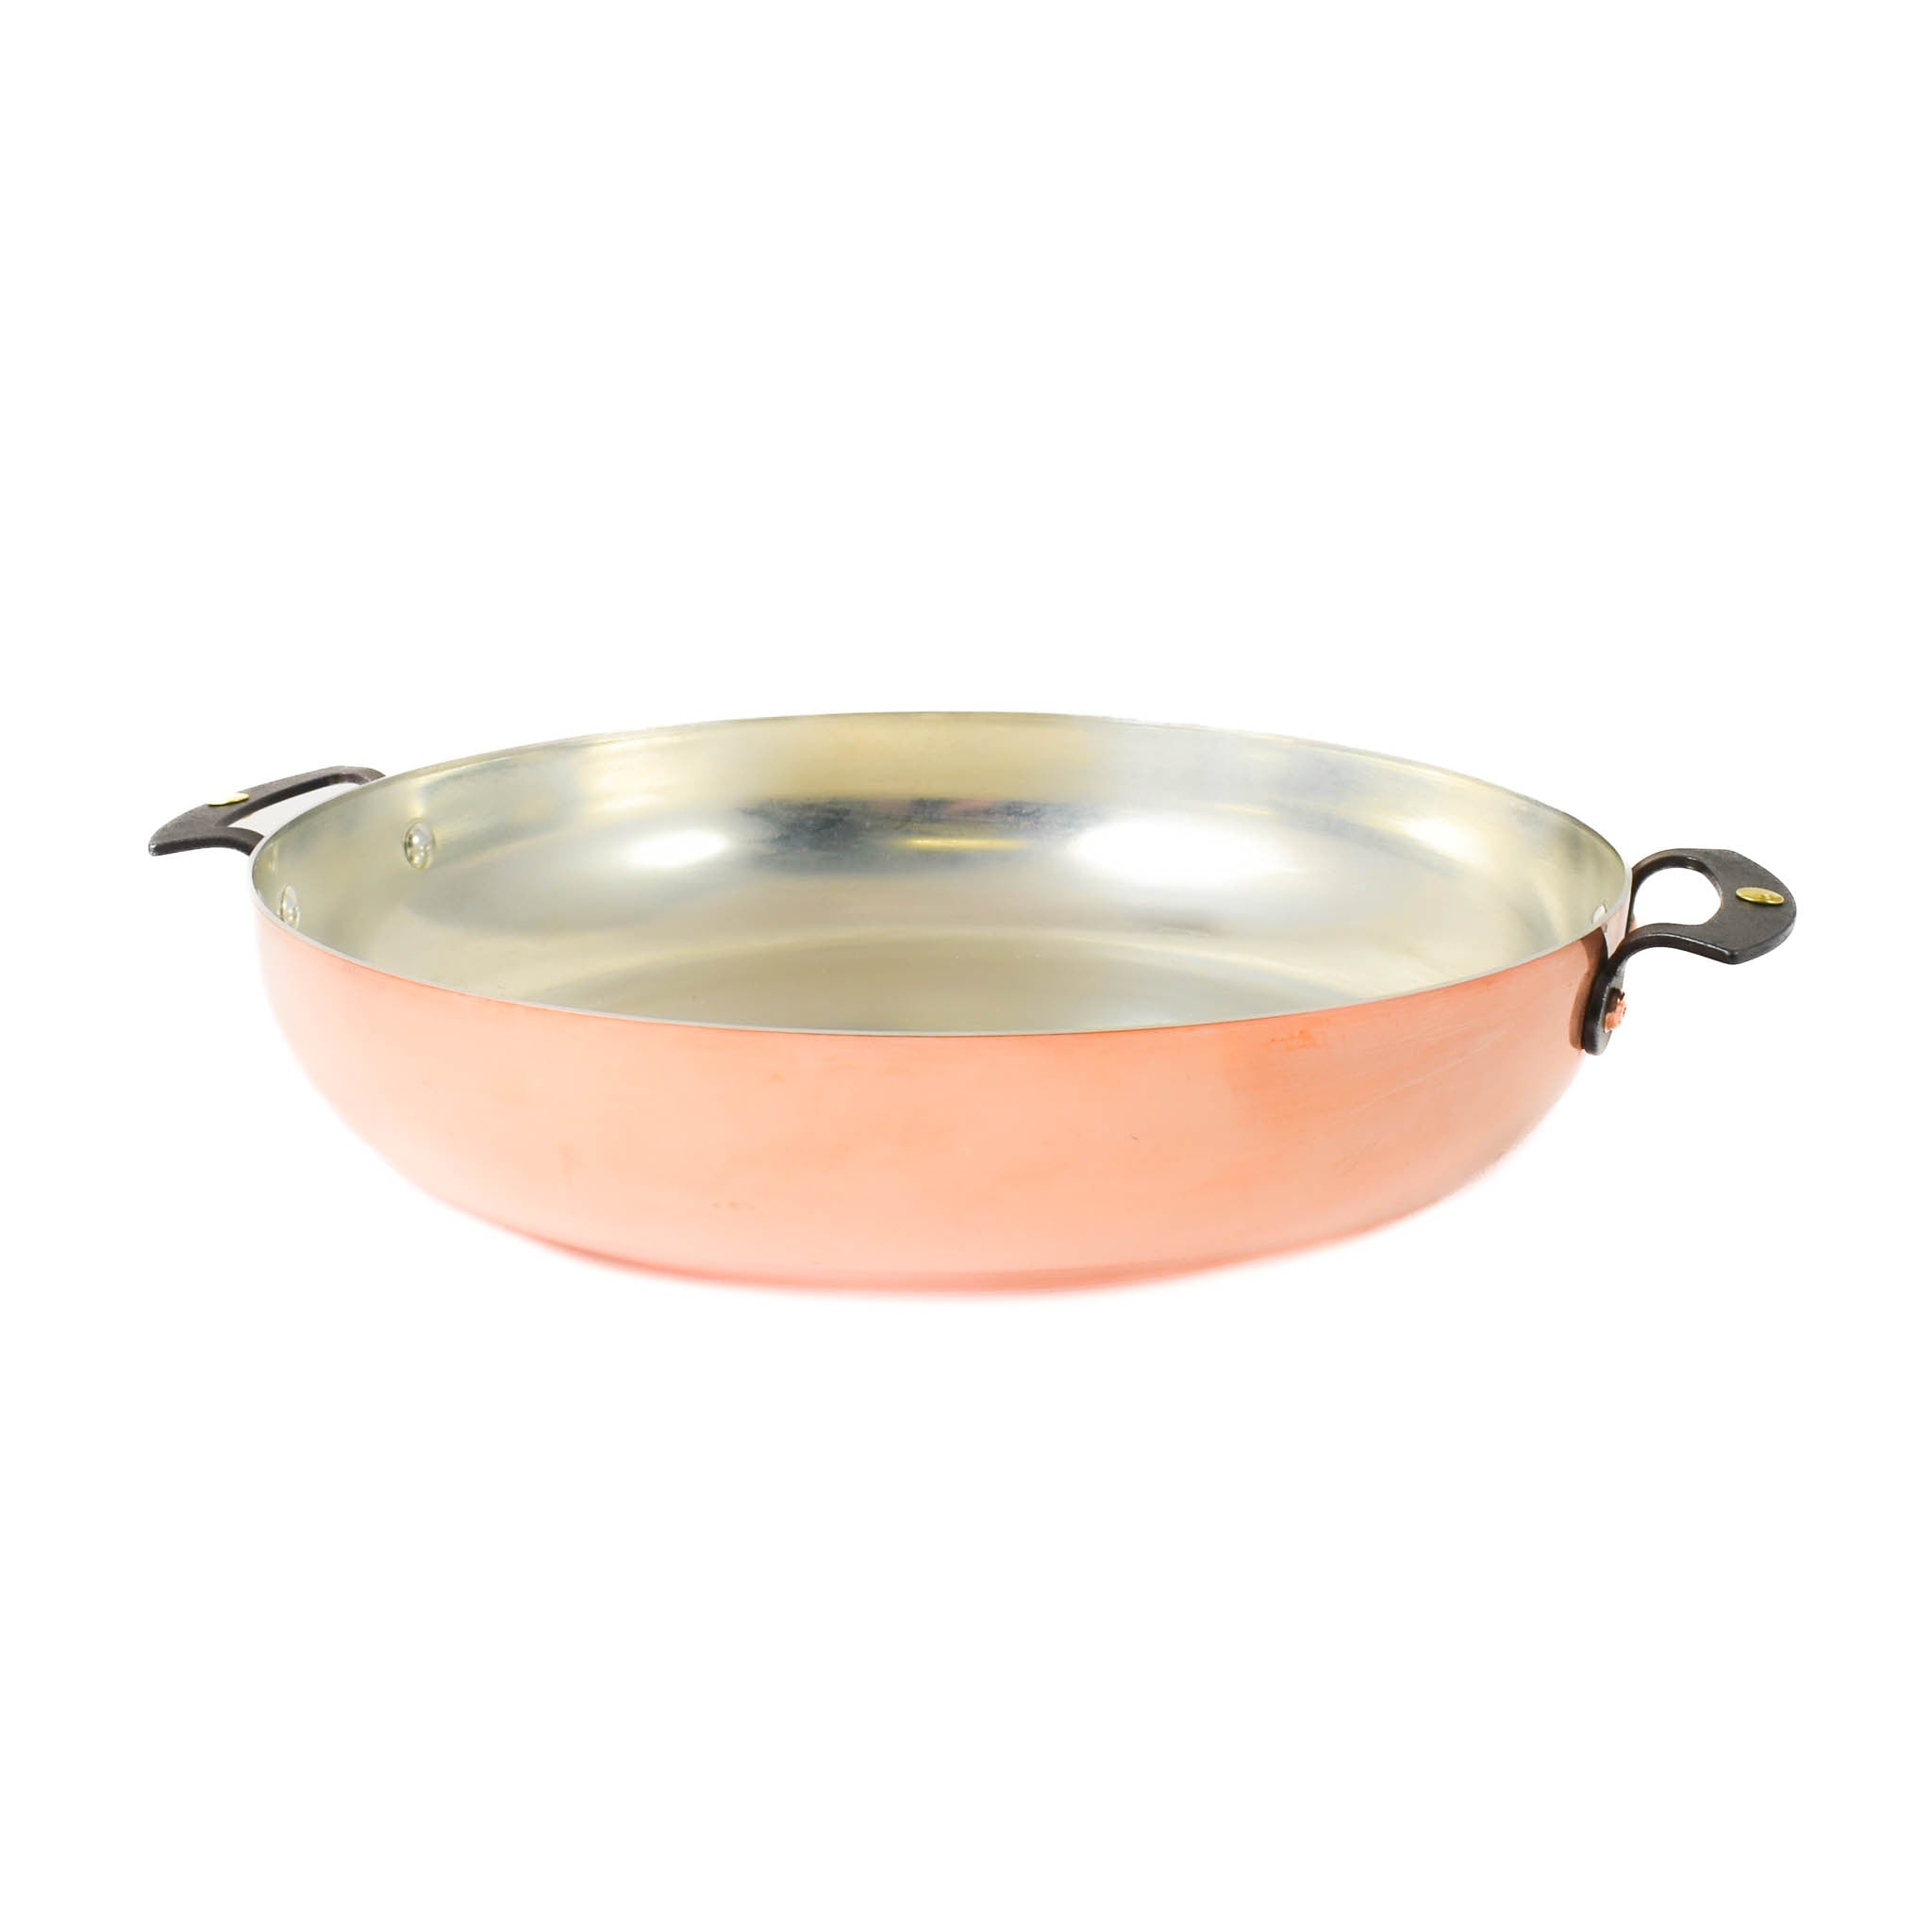 Netherton Foundry Copper Chef's Prospector Pan, 11"